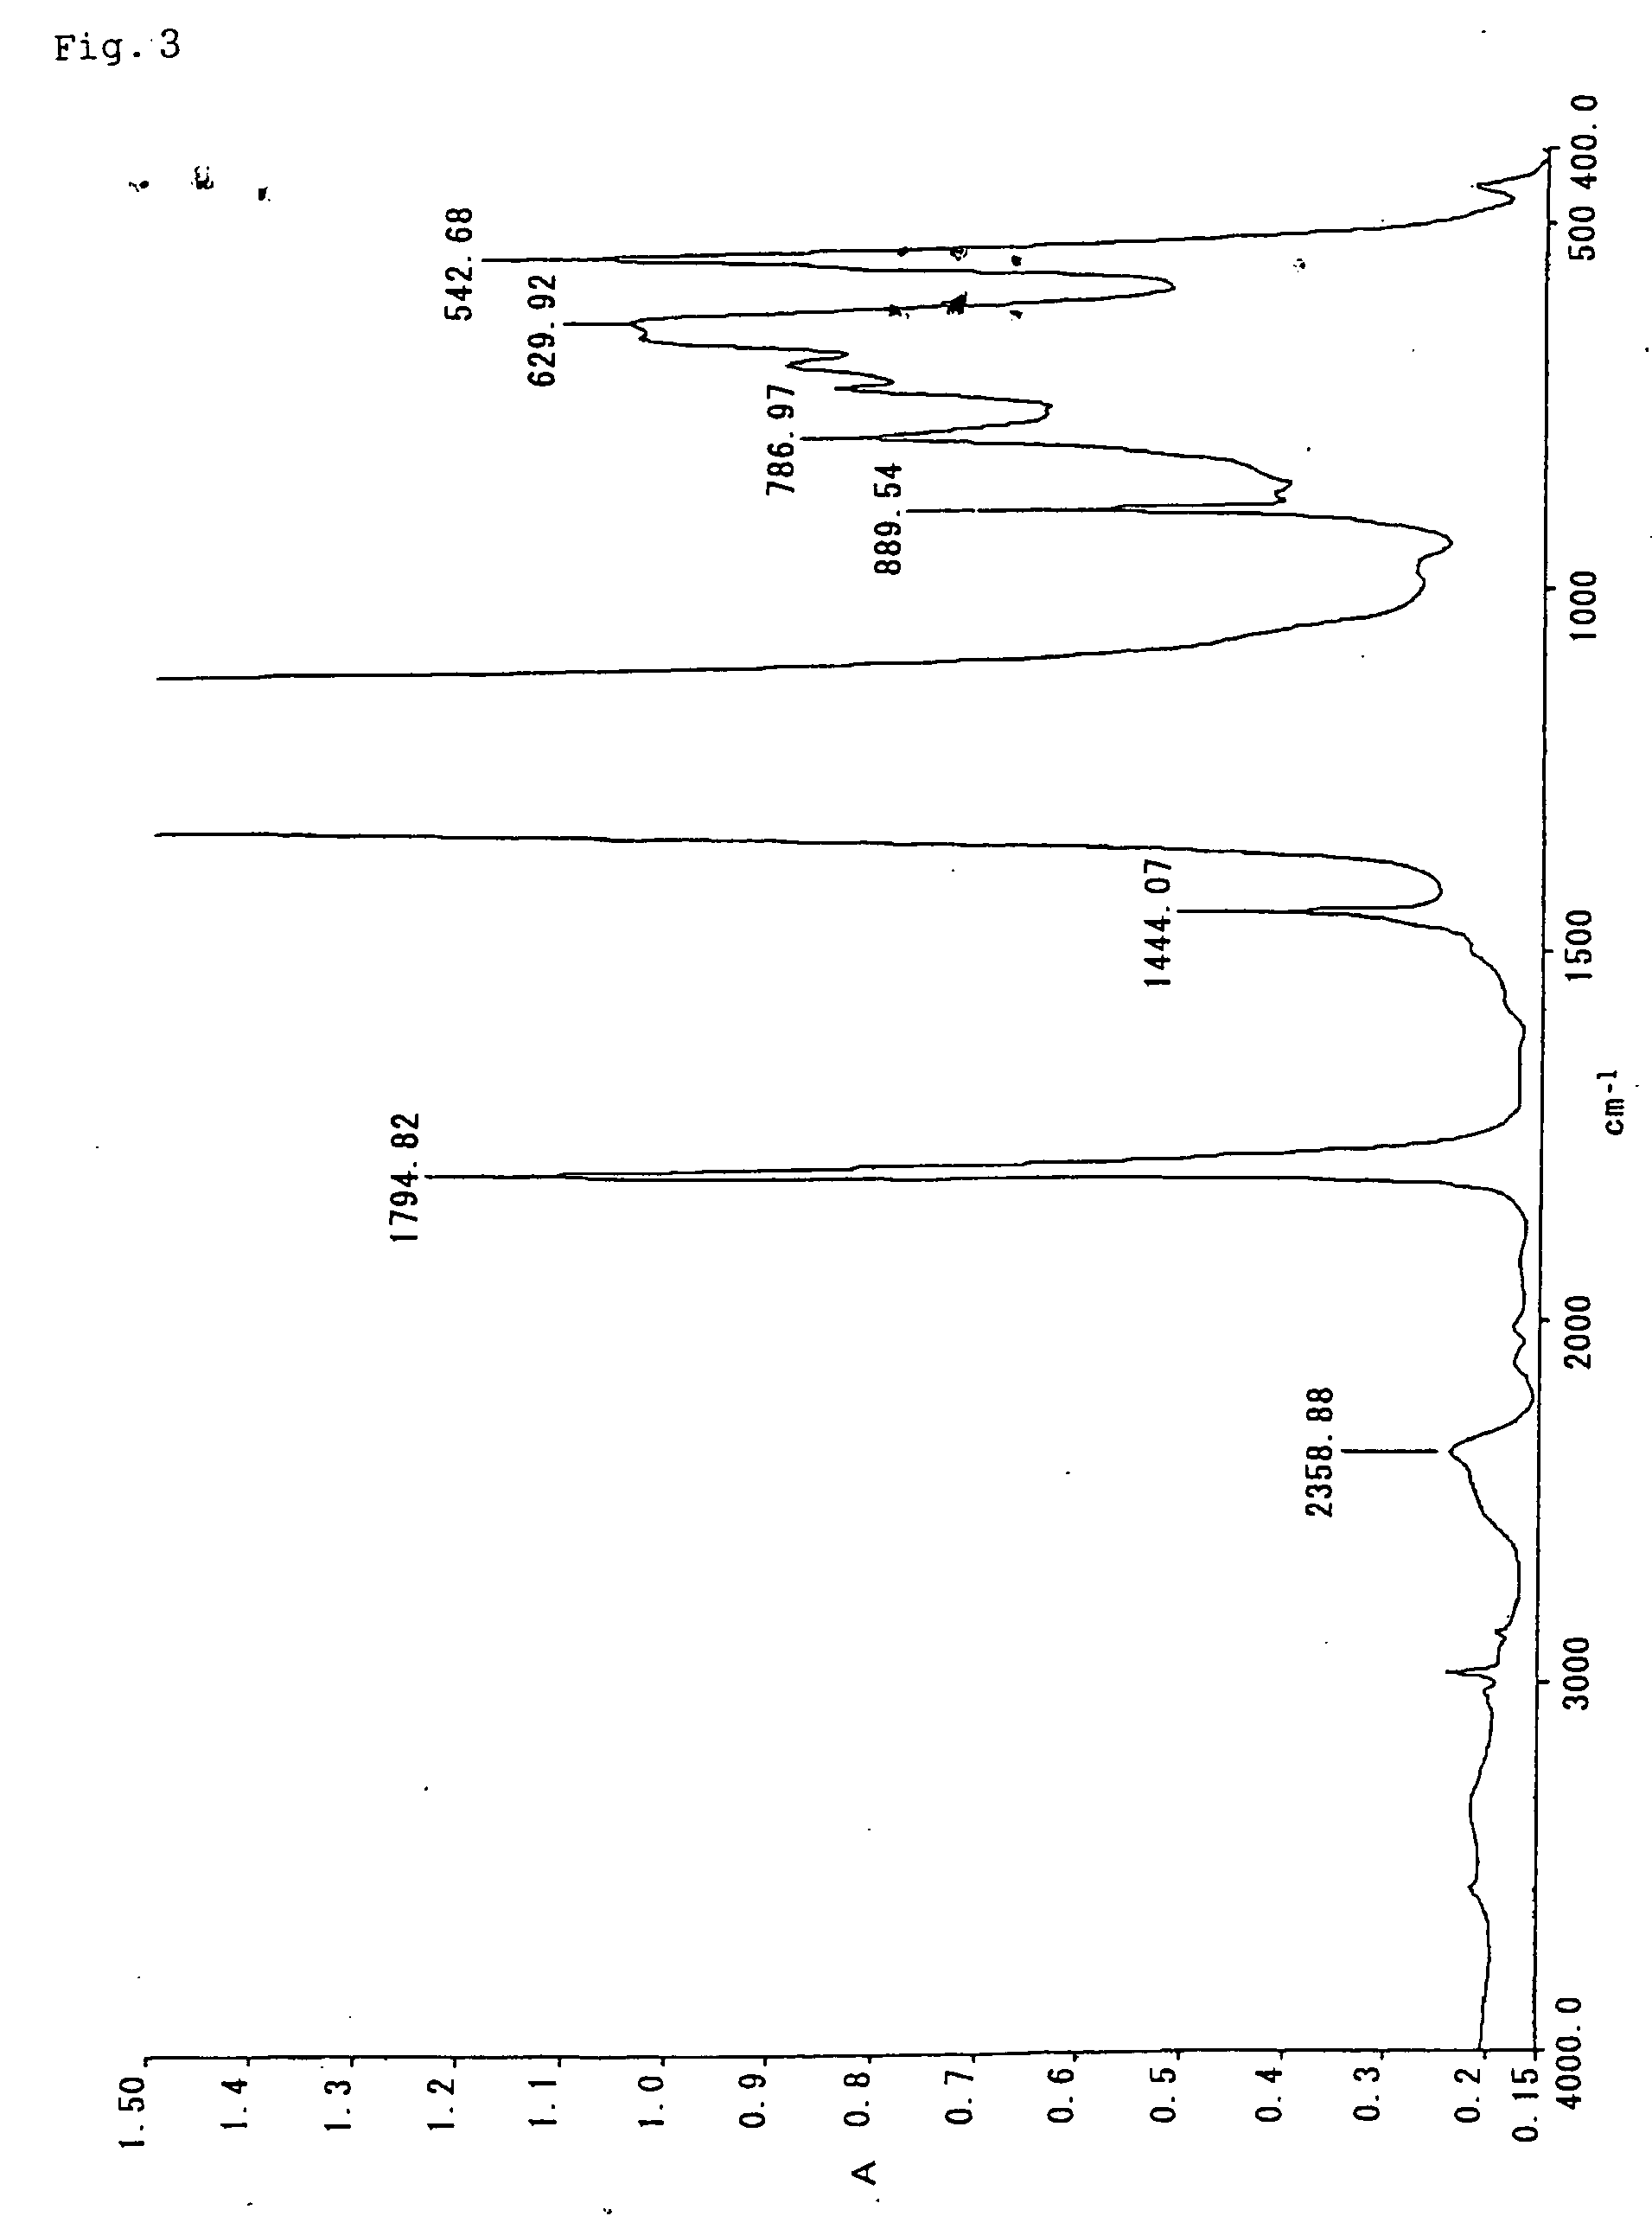 Fluorocopolymer, process for producing fluorocopolymer, fluorocopolymer curable composition, and cured object